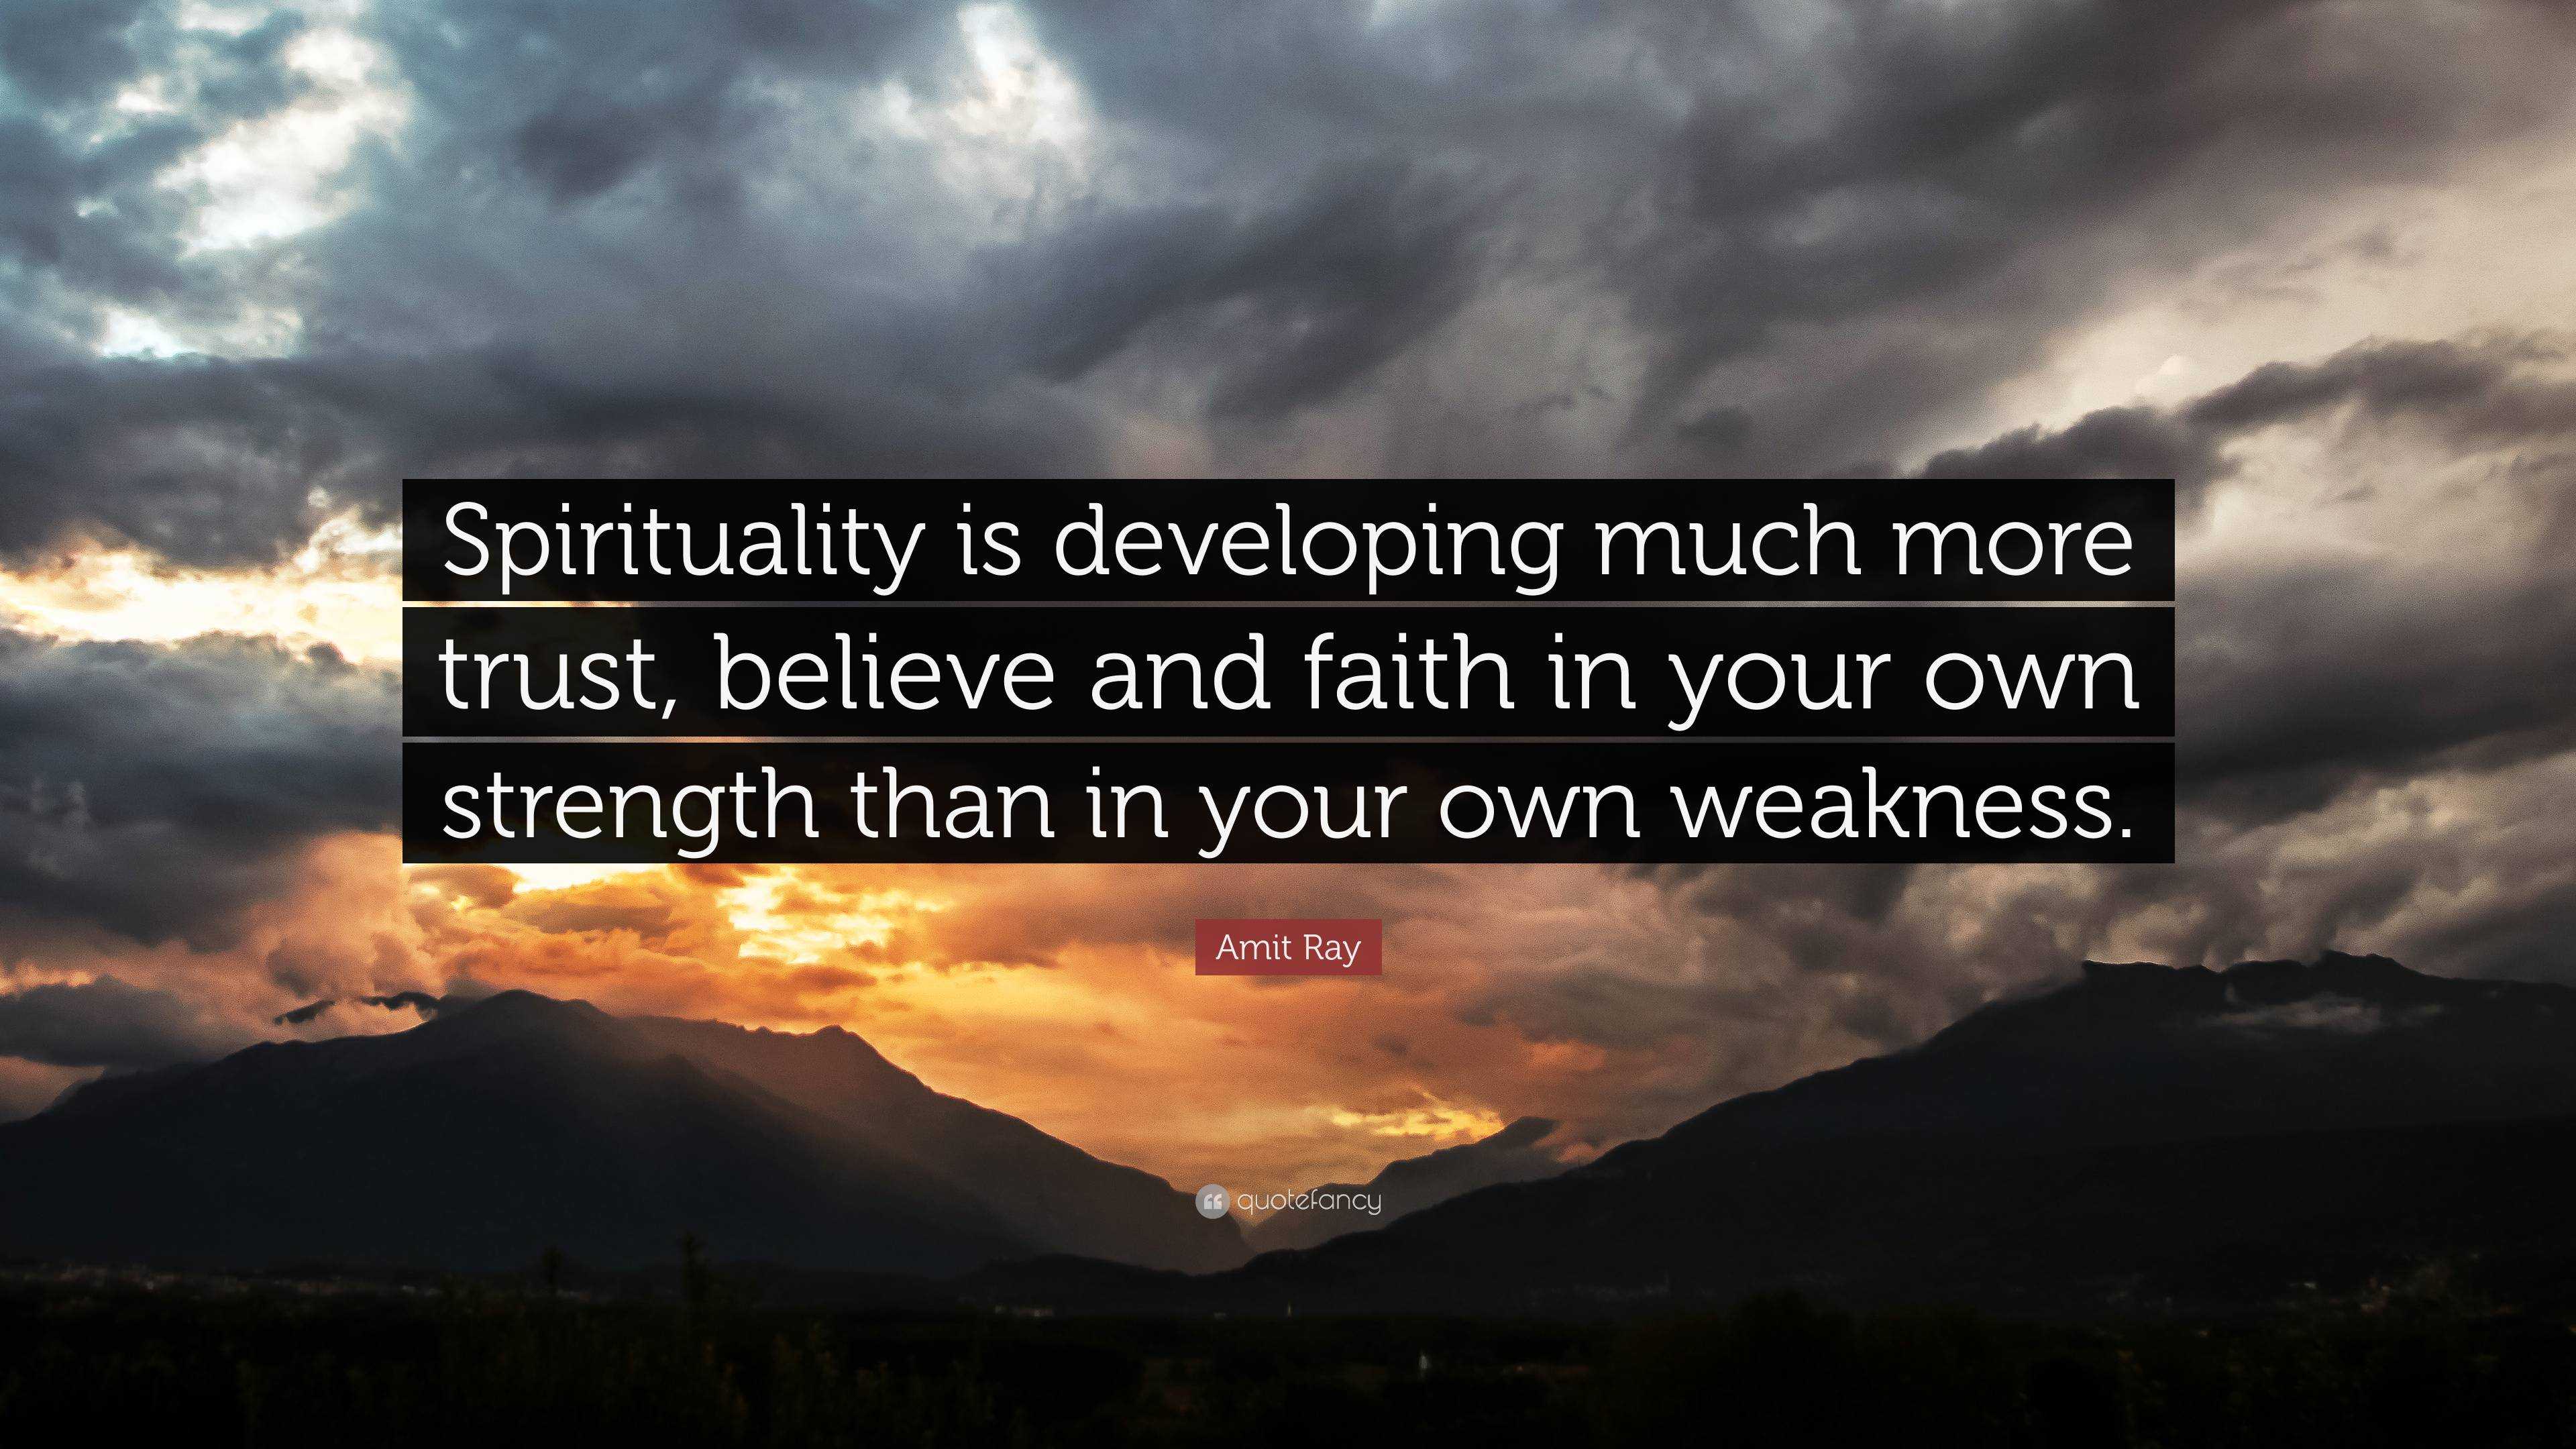 Amit Ray Quote: “Spirituality is developing much more trust, believe ...